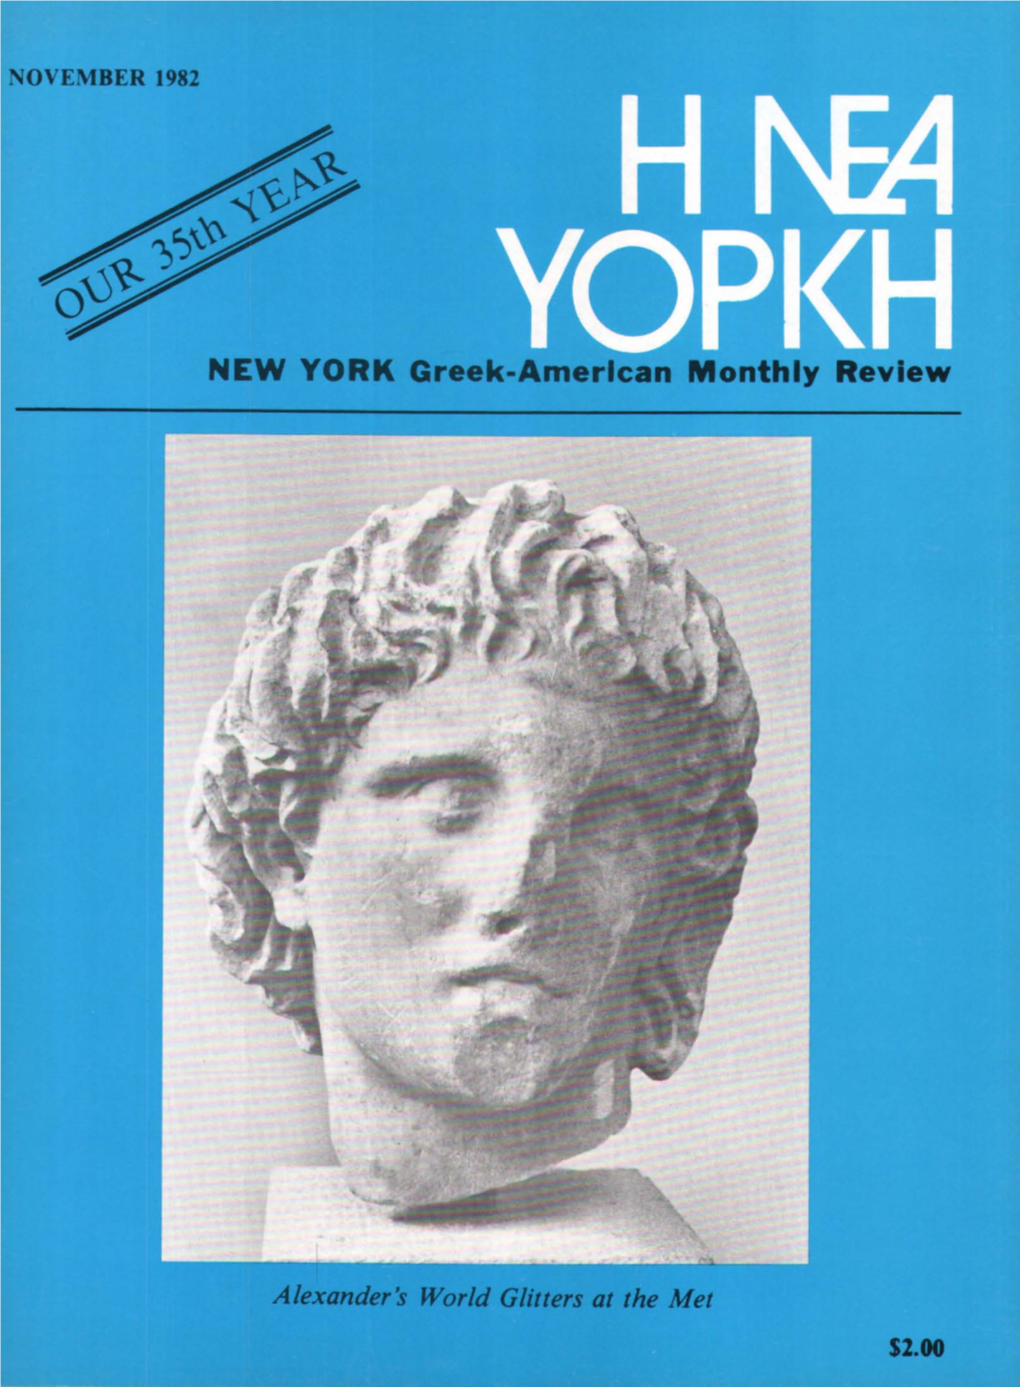 NEW YORK Greek-American Monthly Review